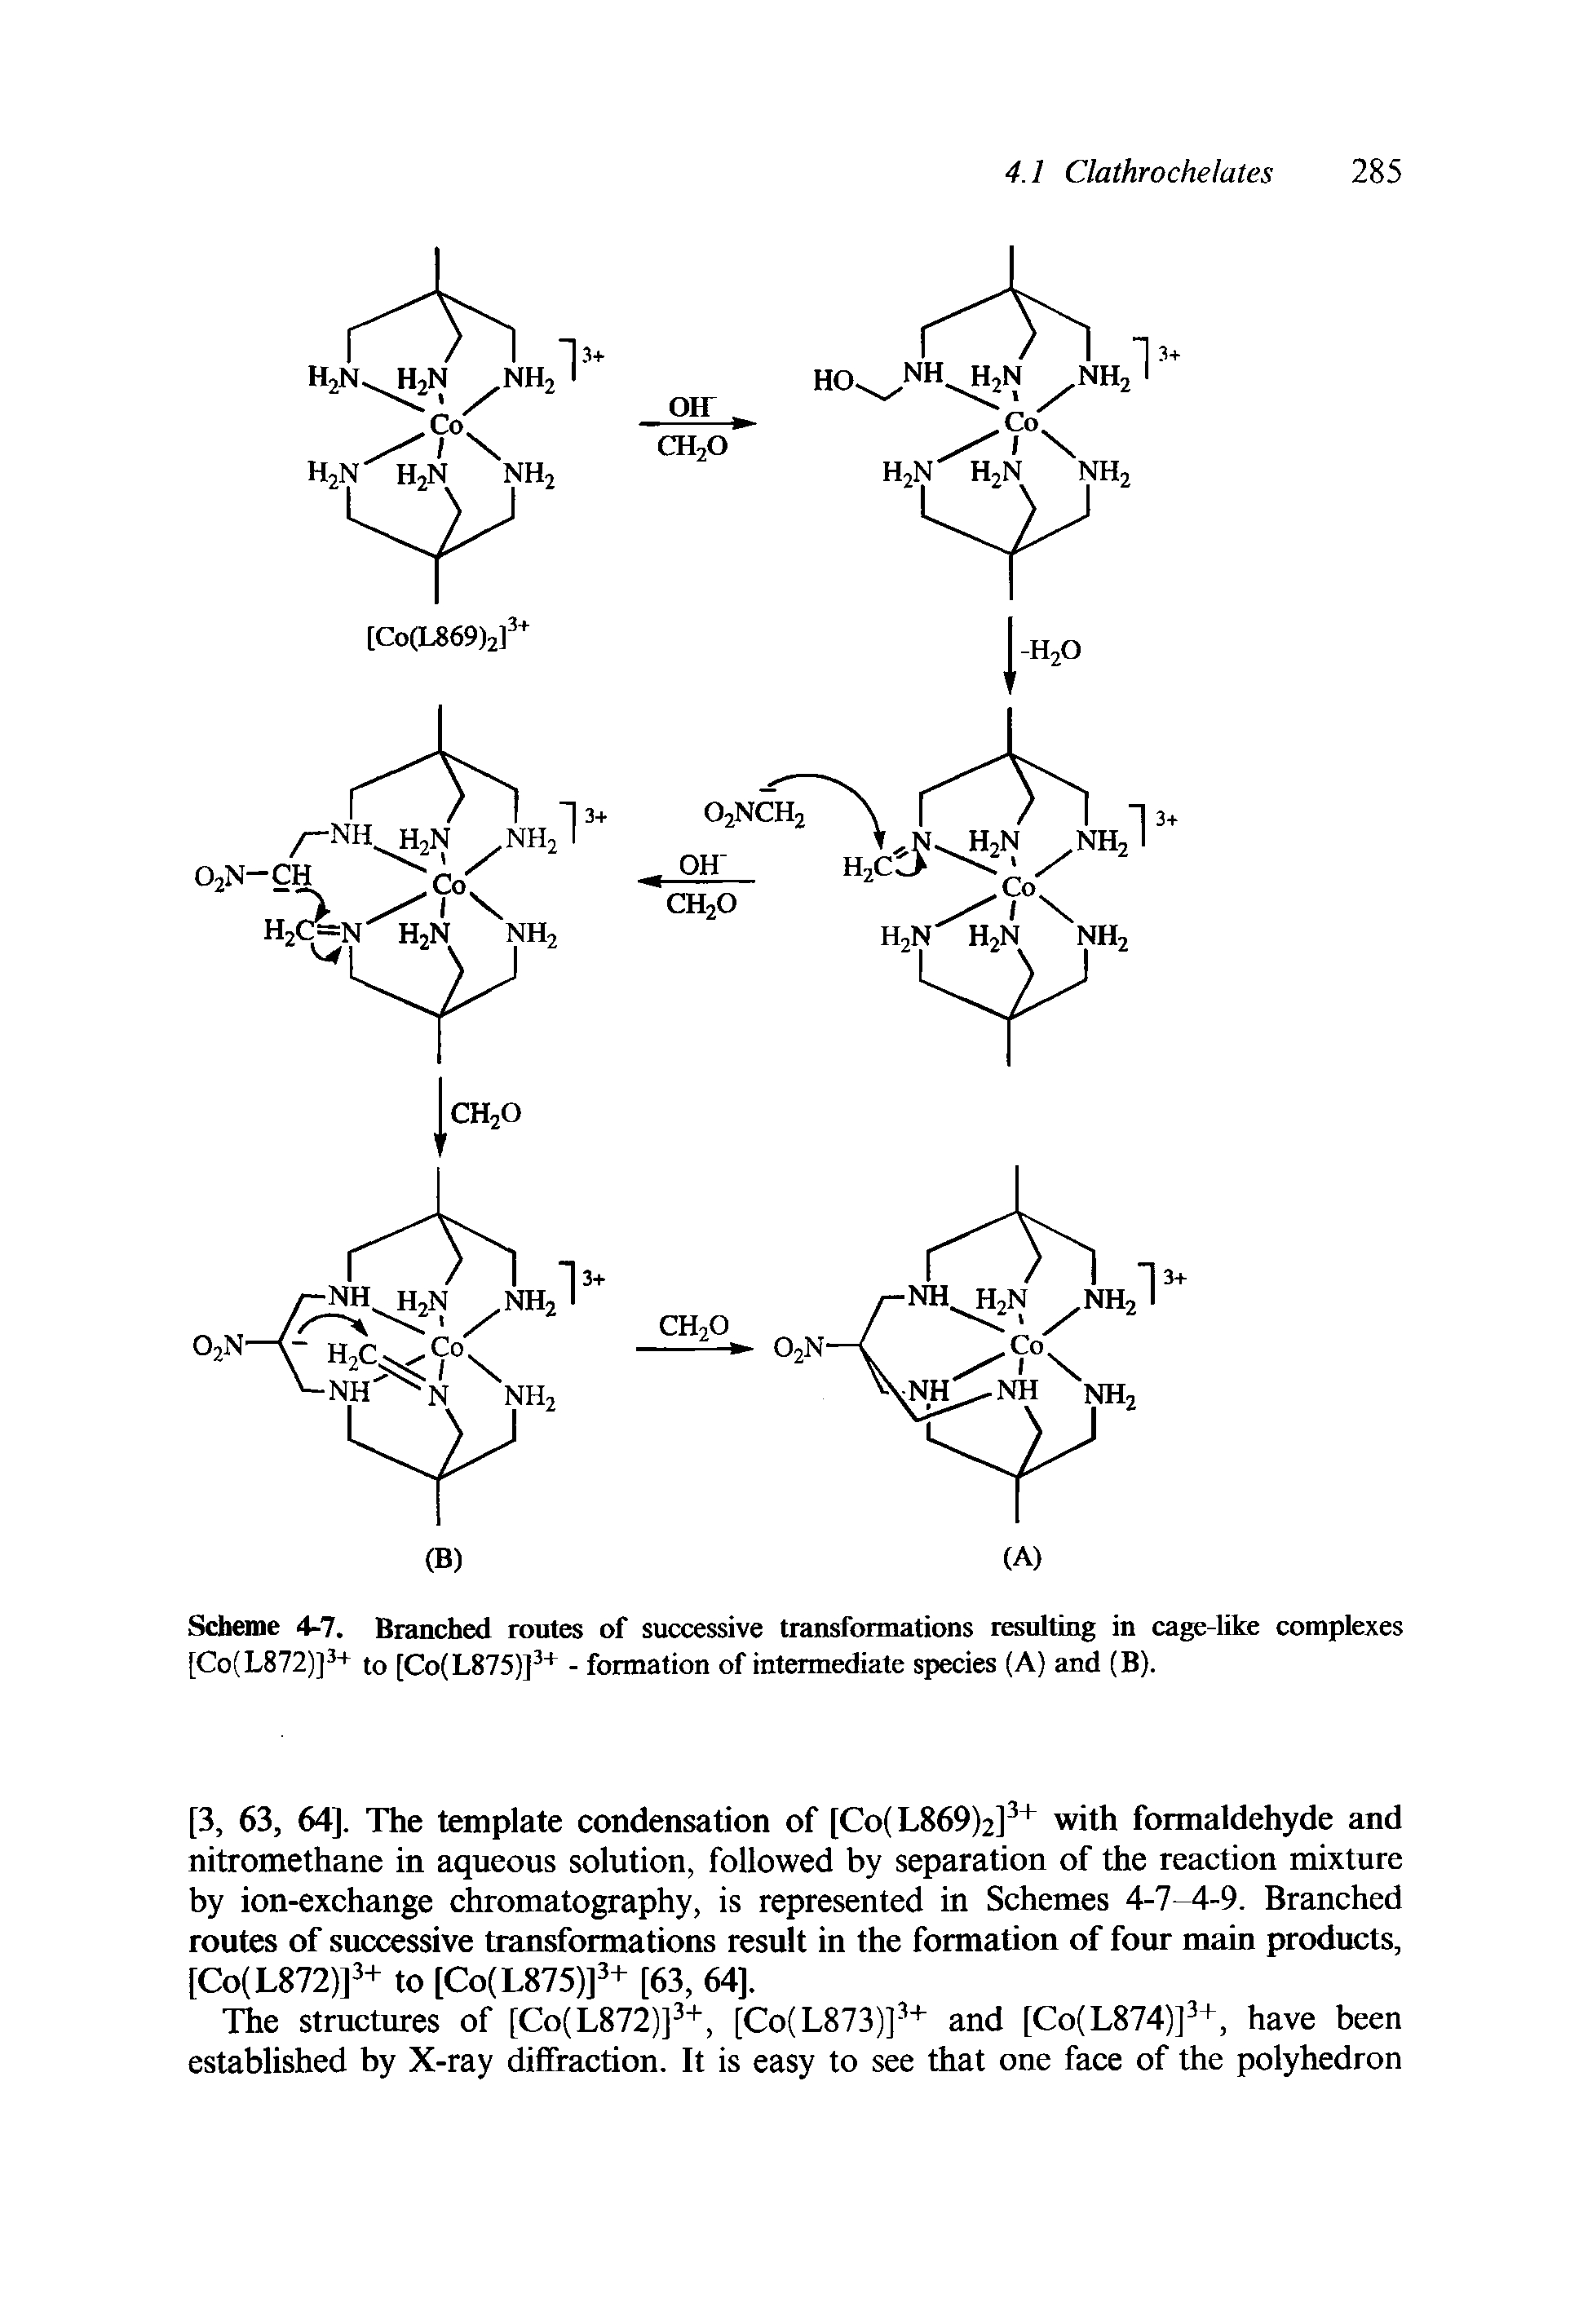 Scheme 4-7. Branched routes of successive transformations resulting in cage-like complexes [Co(L872)] + to [Co(L875)] - formation of intermediate species (A) and (B).